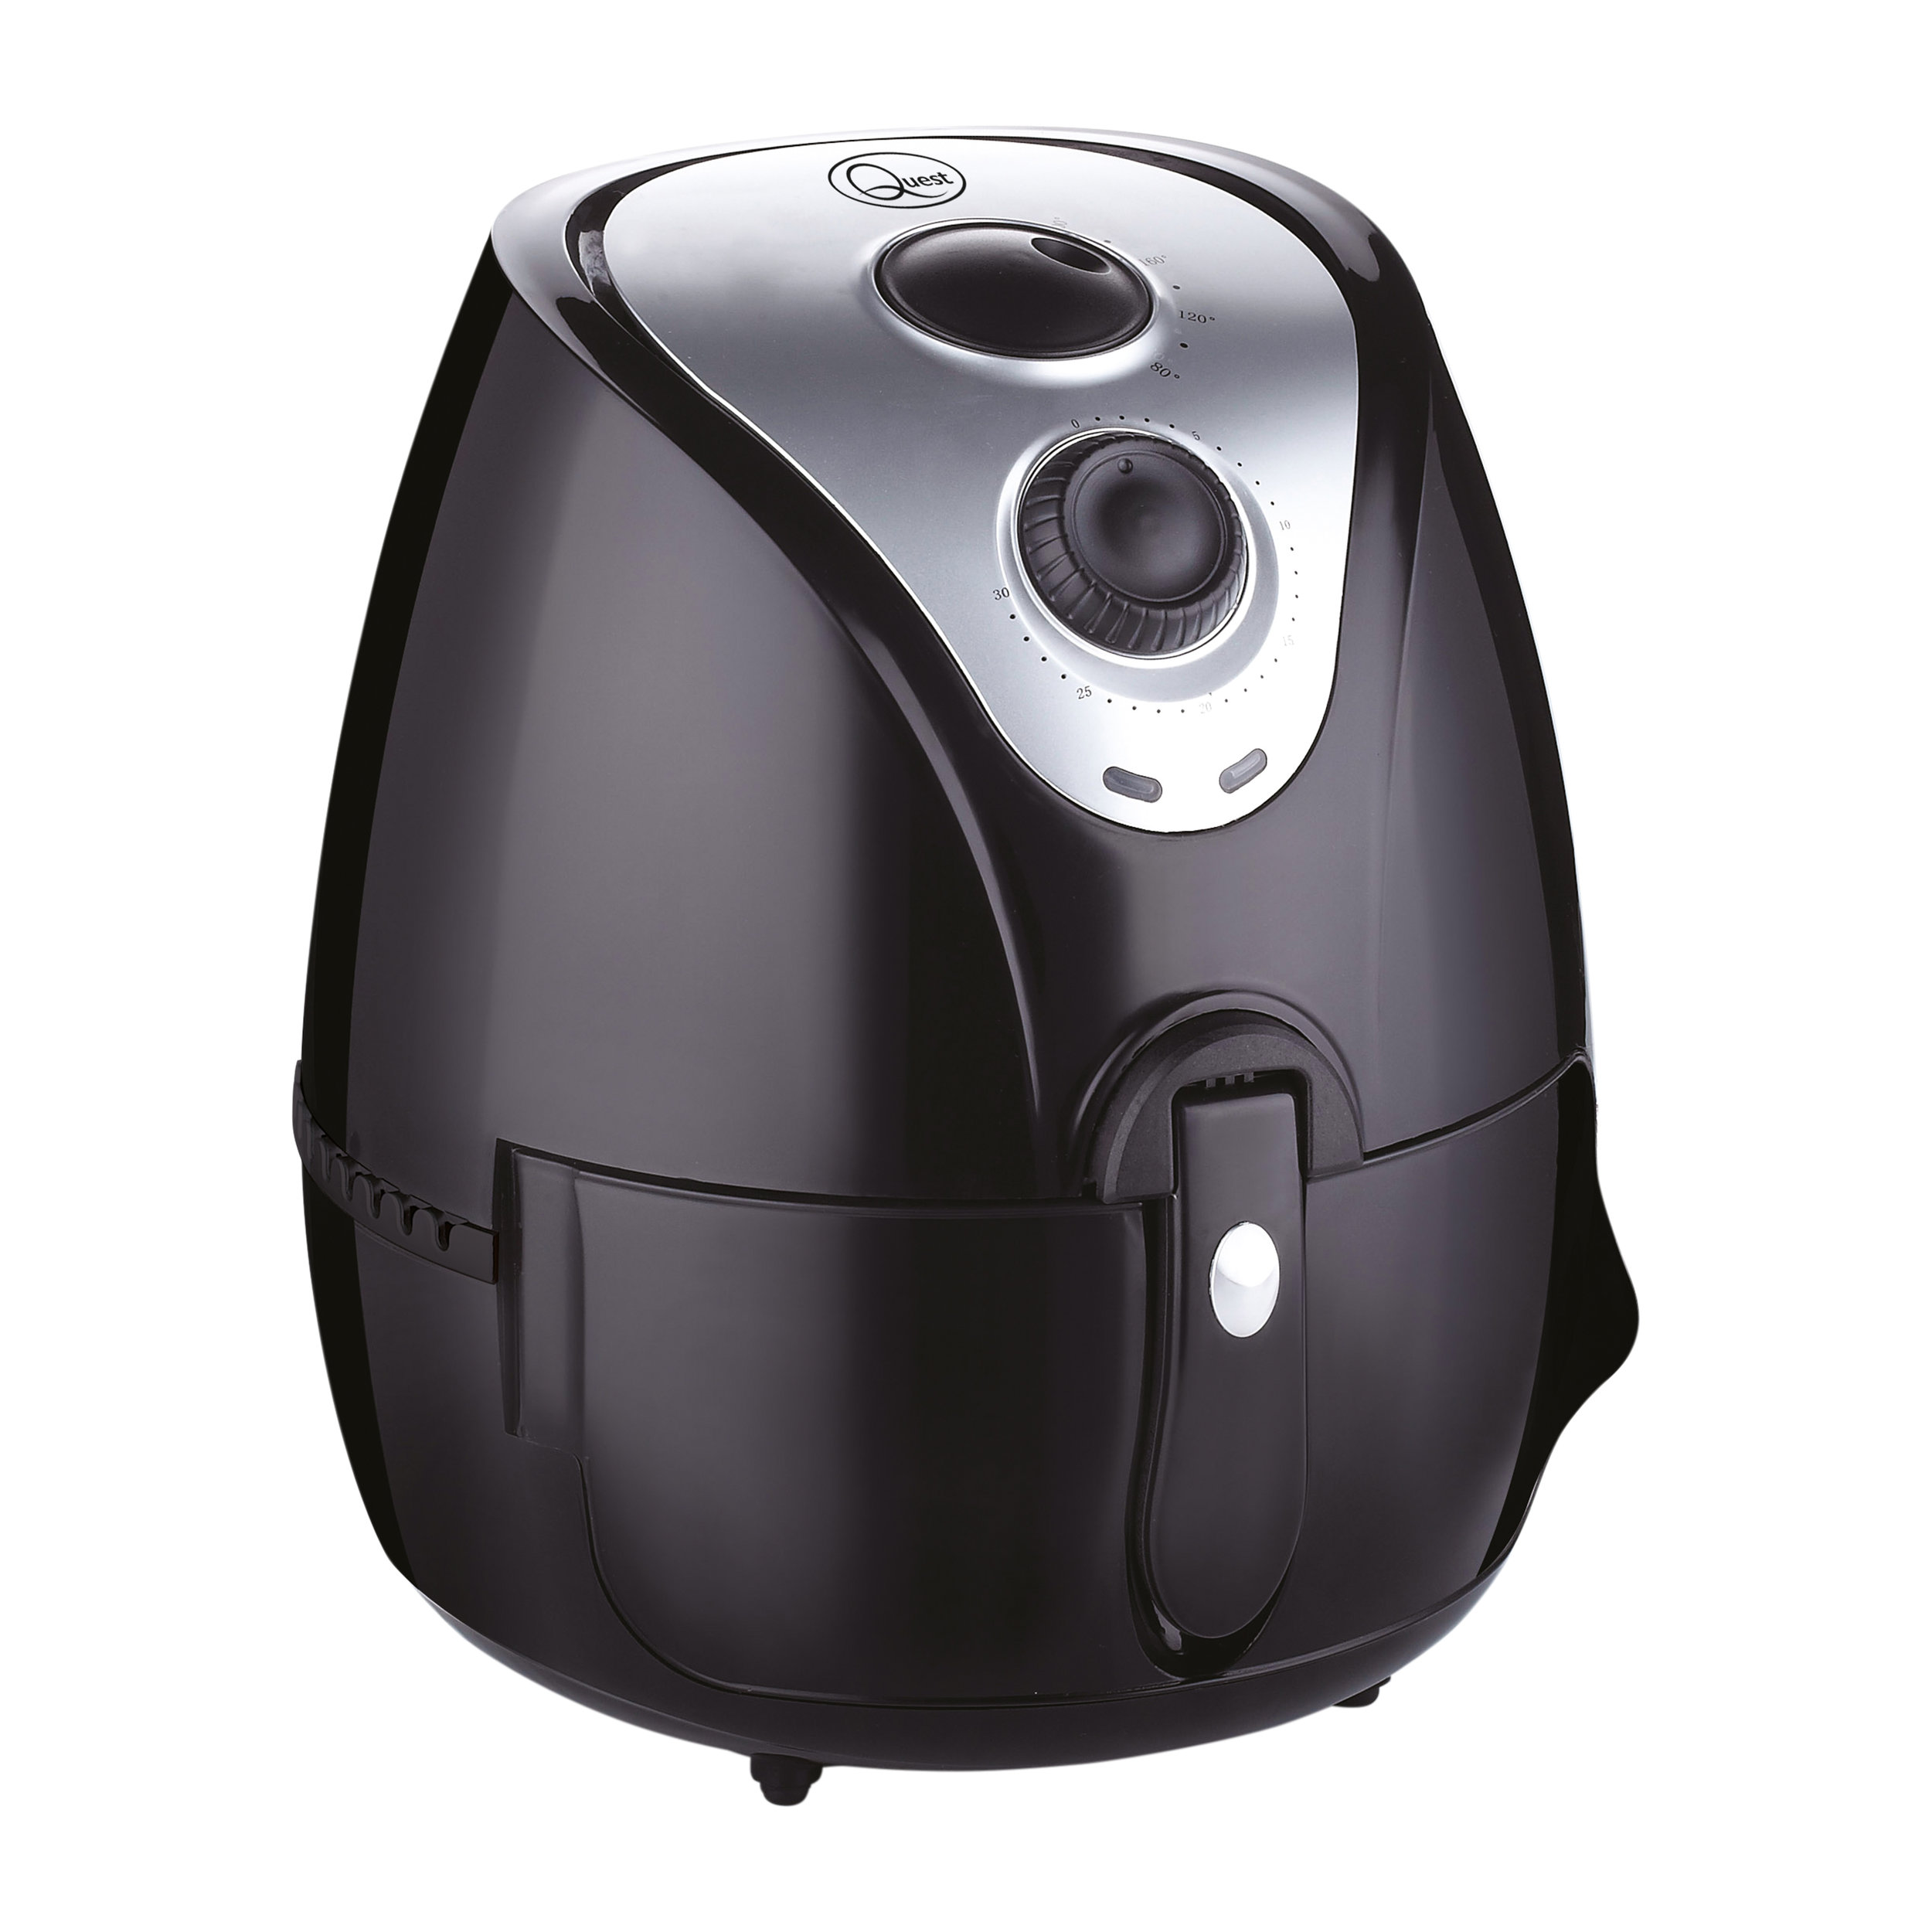 2.2 Litre Quest Thermo Air Fryer